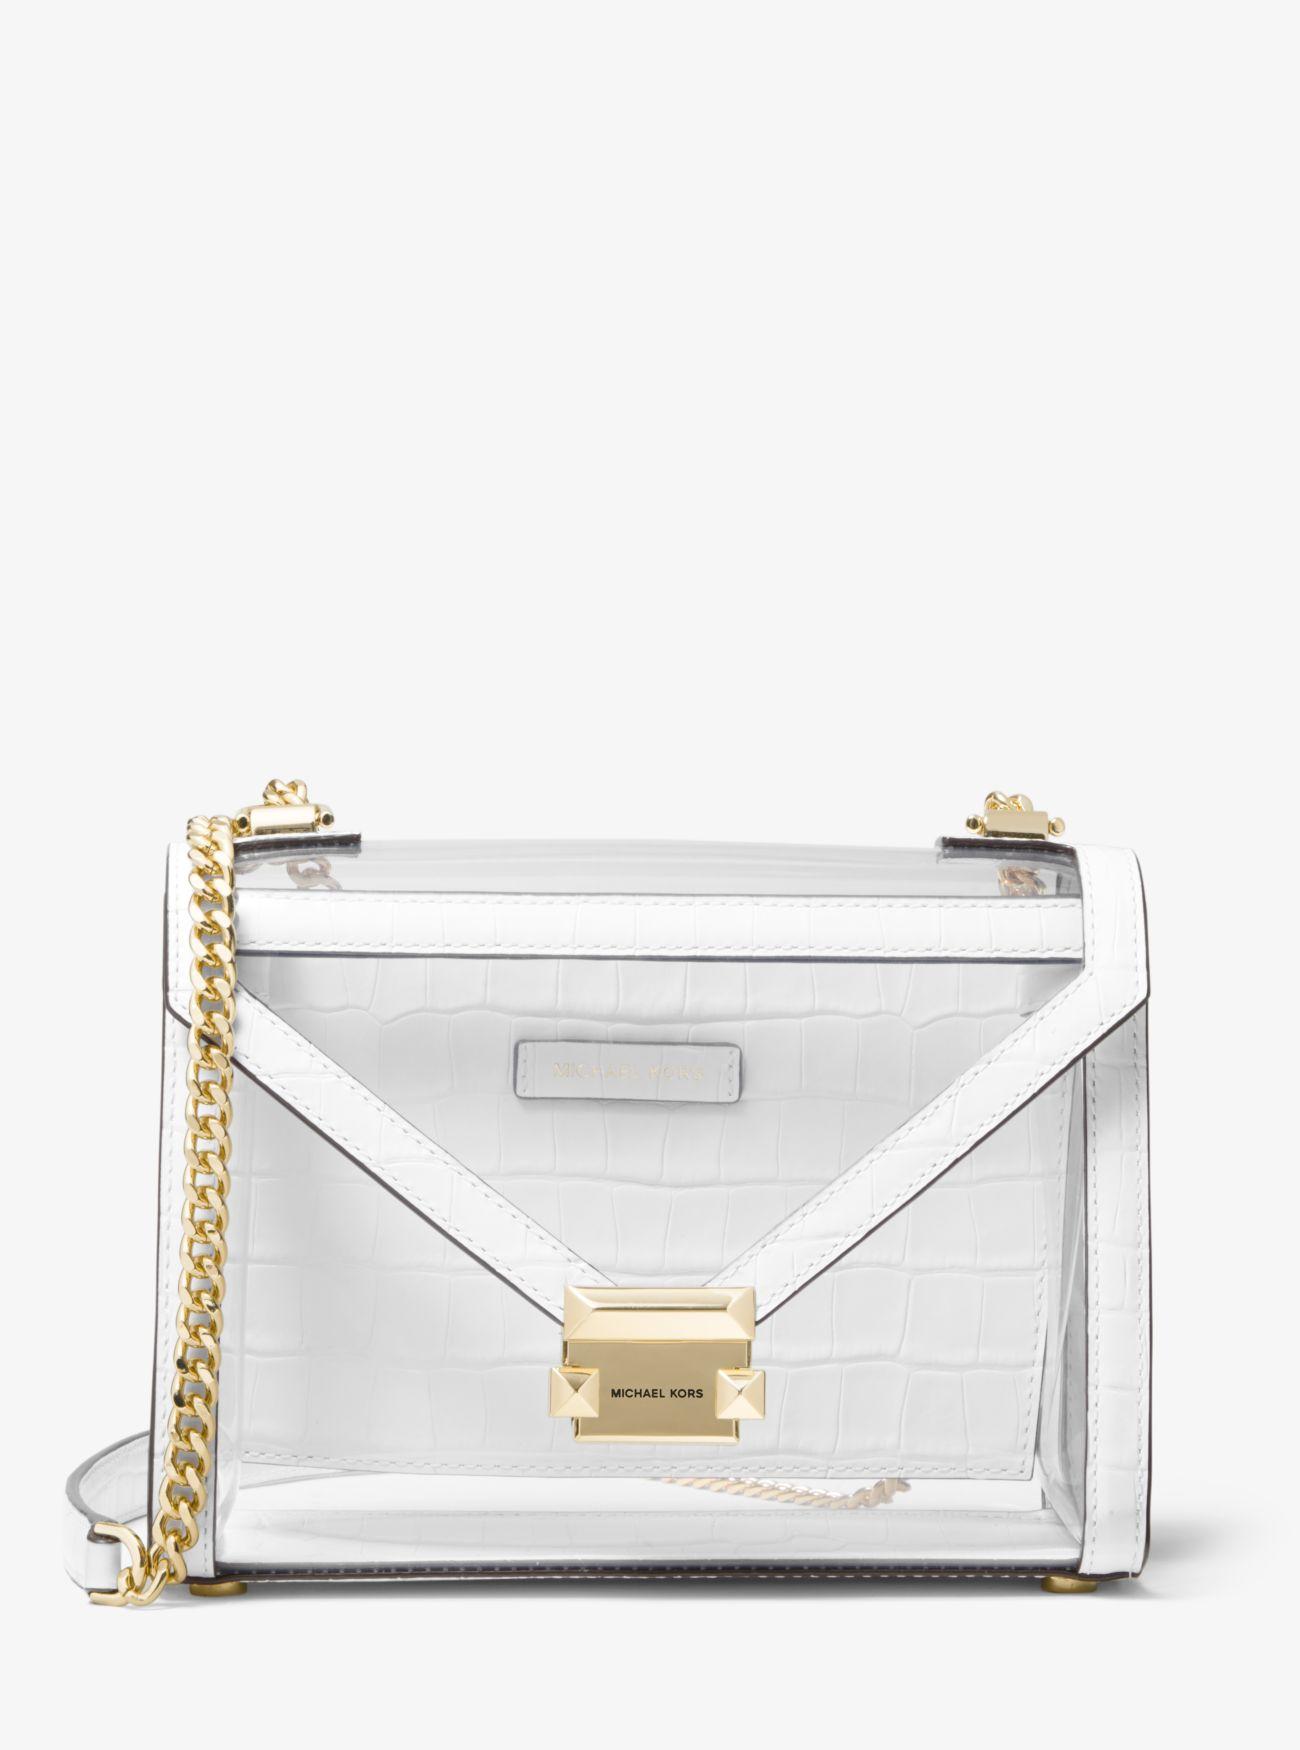 Michael Kors Leather Whitney Large Convertible Shoulder Bag in White | Lyst